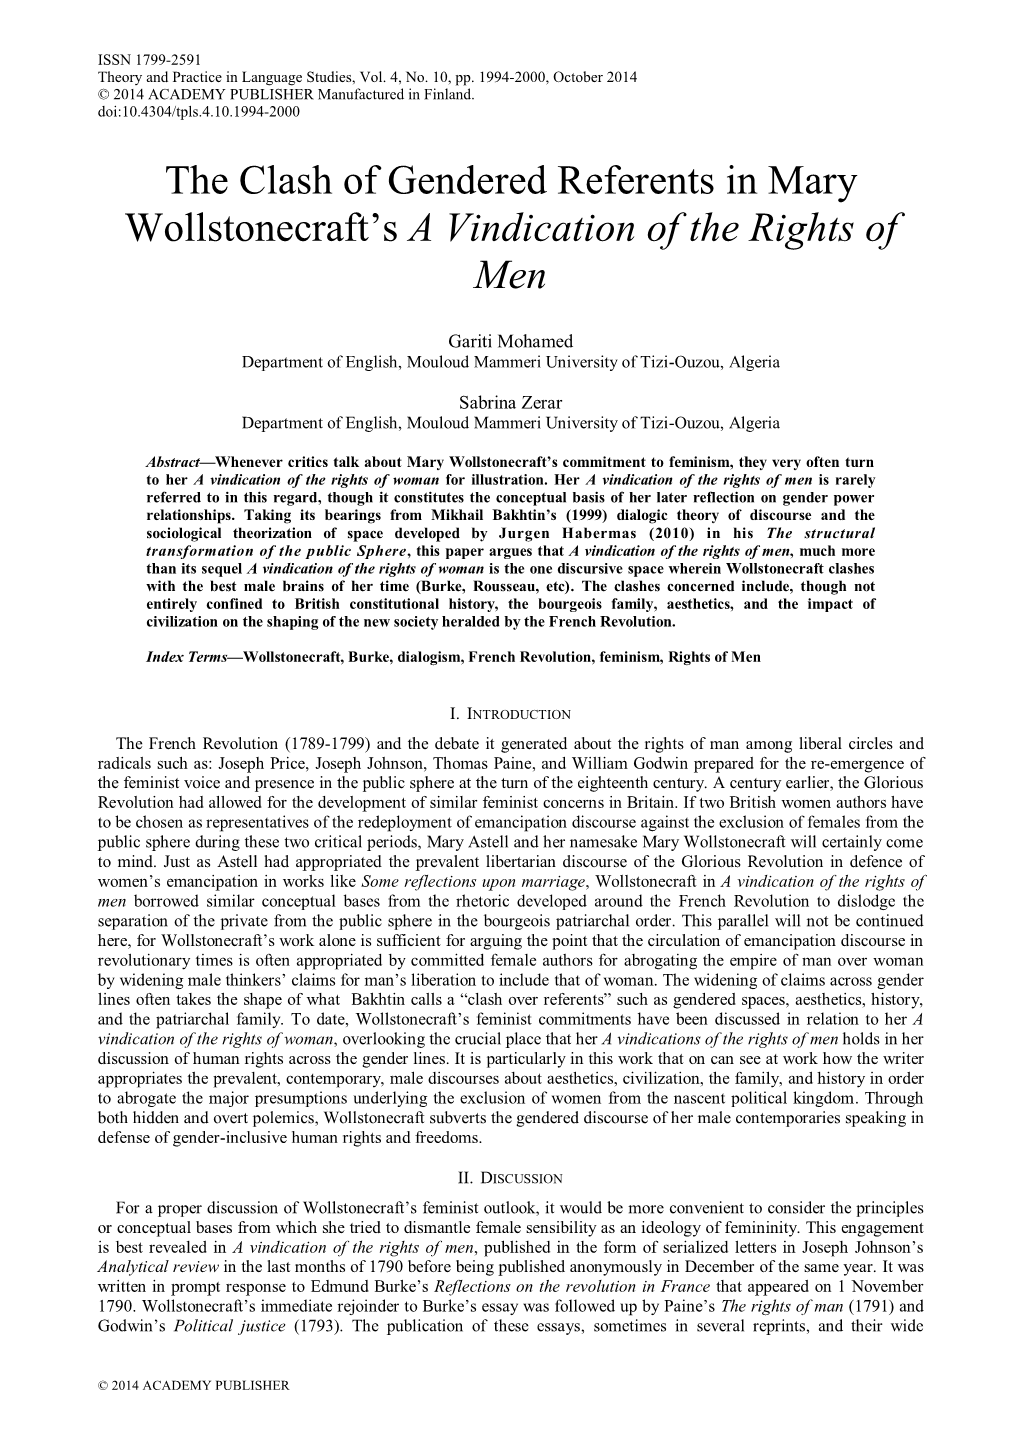 The Clash of Gendered Referents in Mary Wollstonecraft‟S a Vindication of the Rights of Men